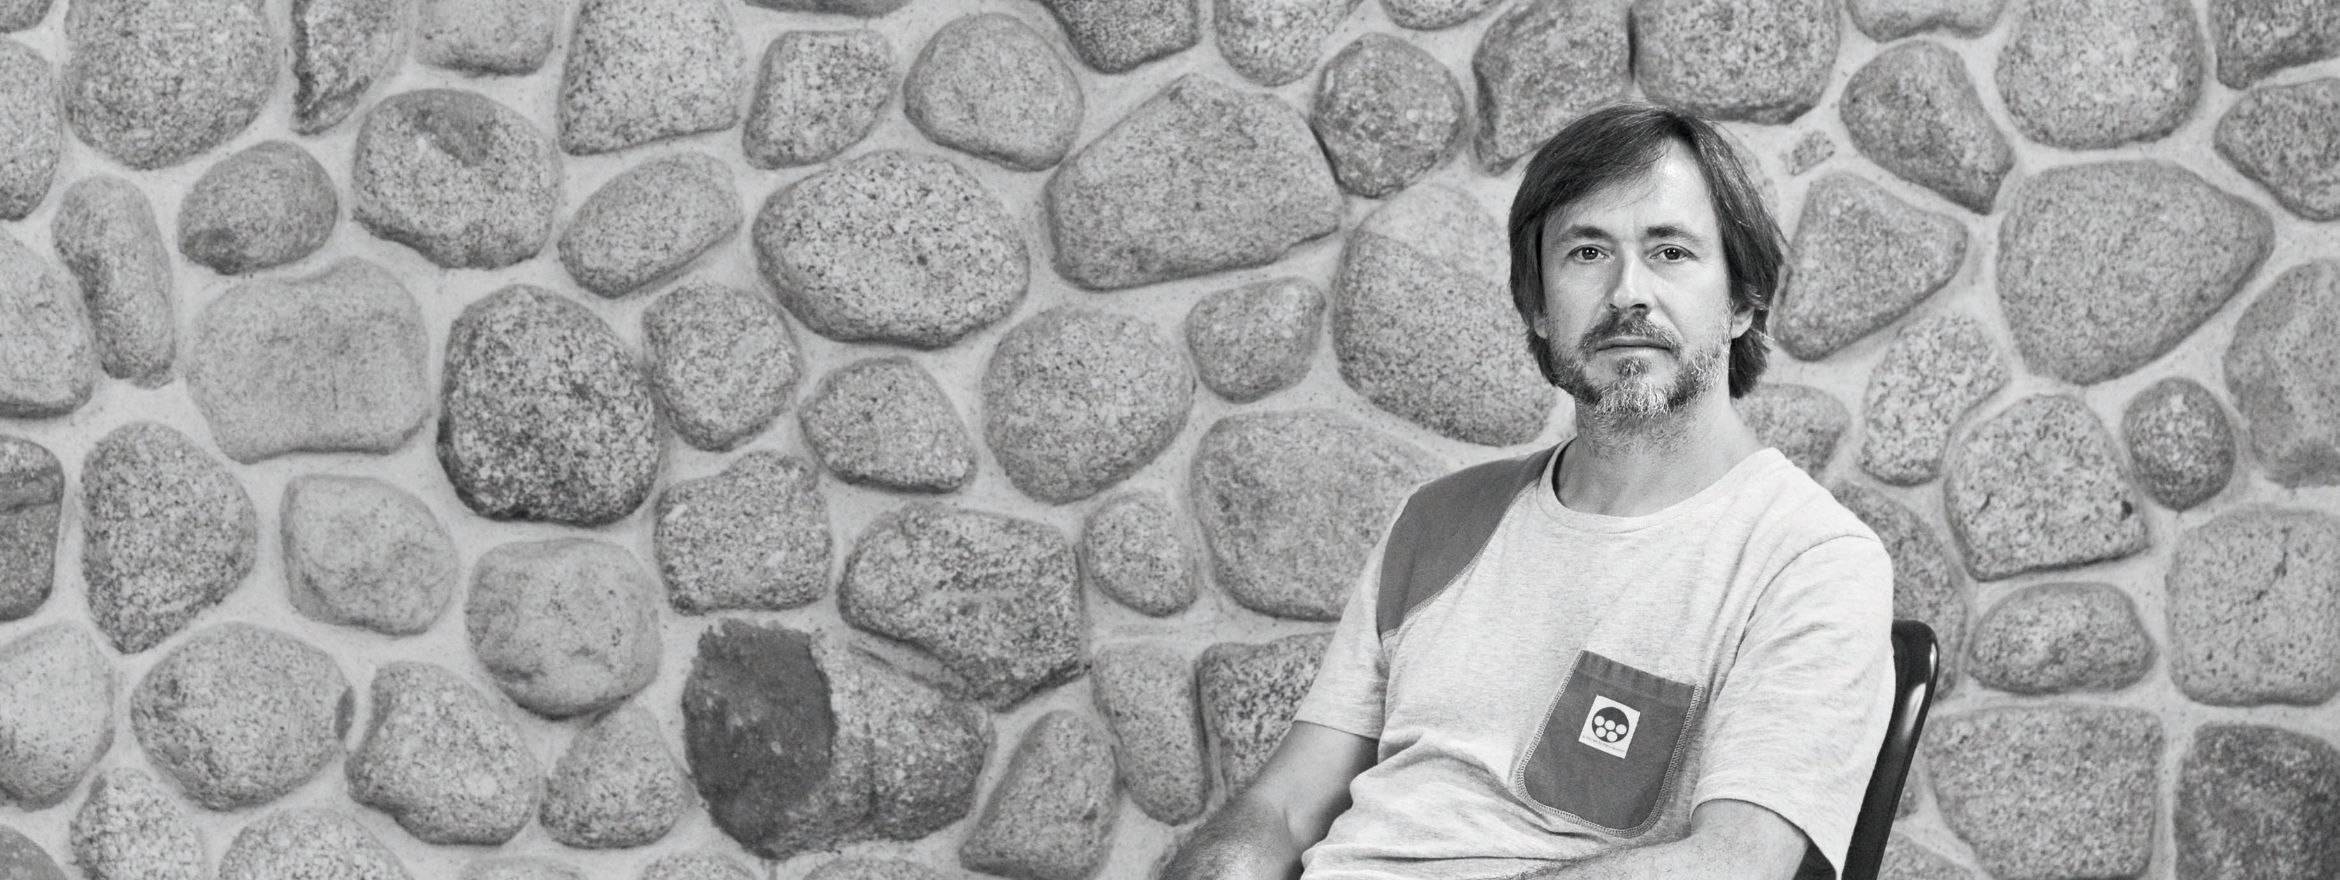 Marc Newson on his monograph and fascination with watches